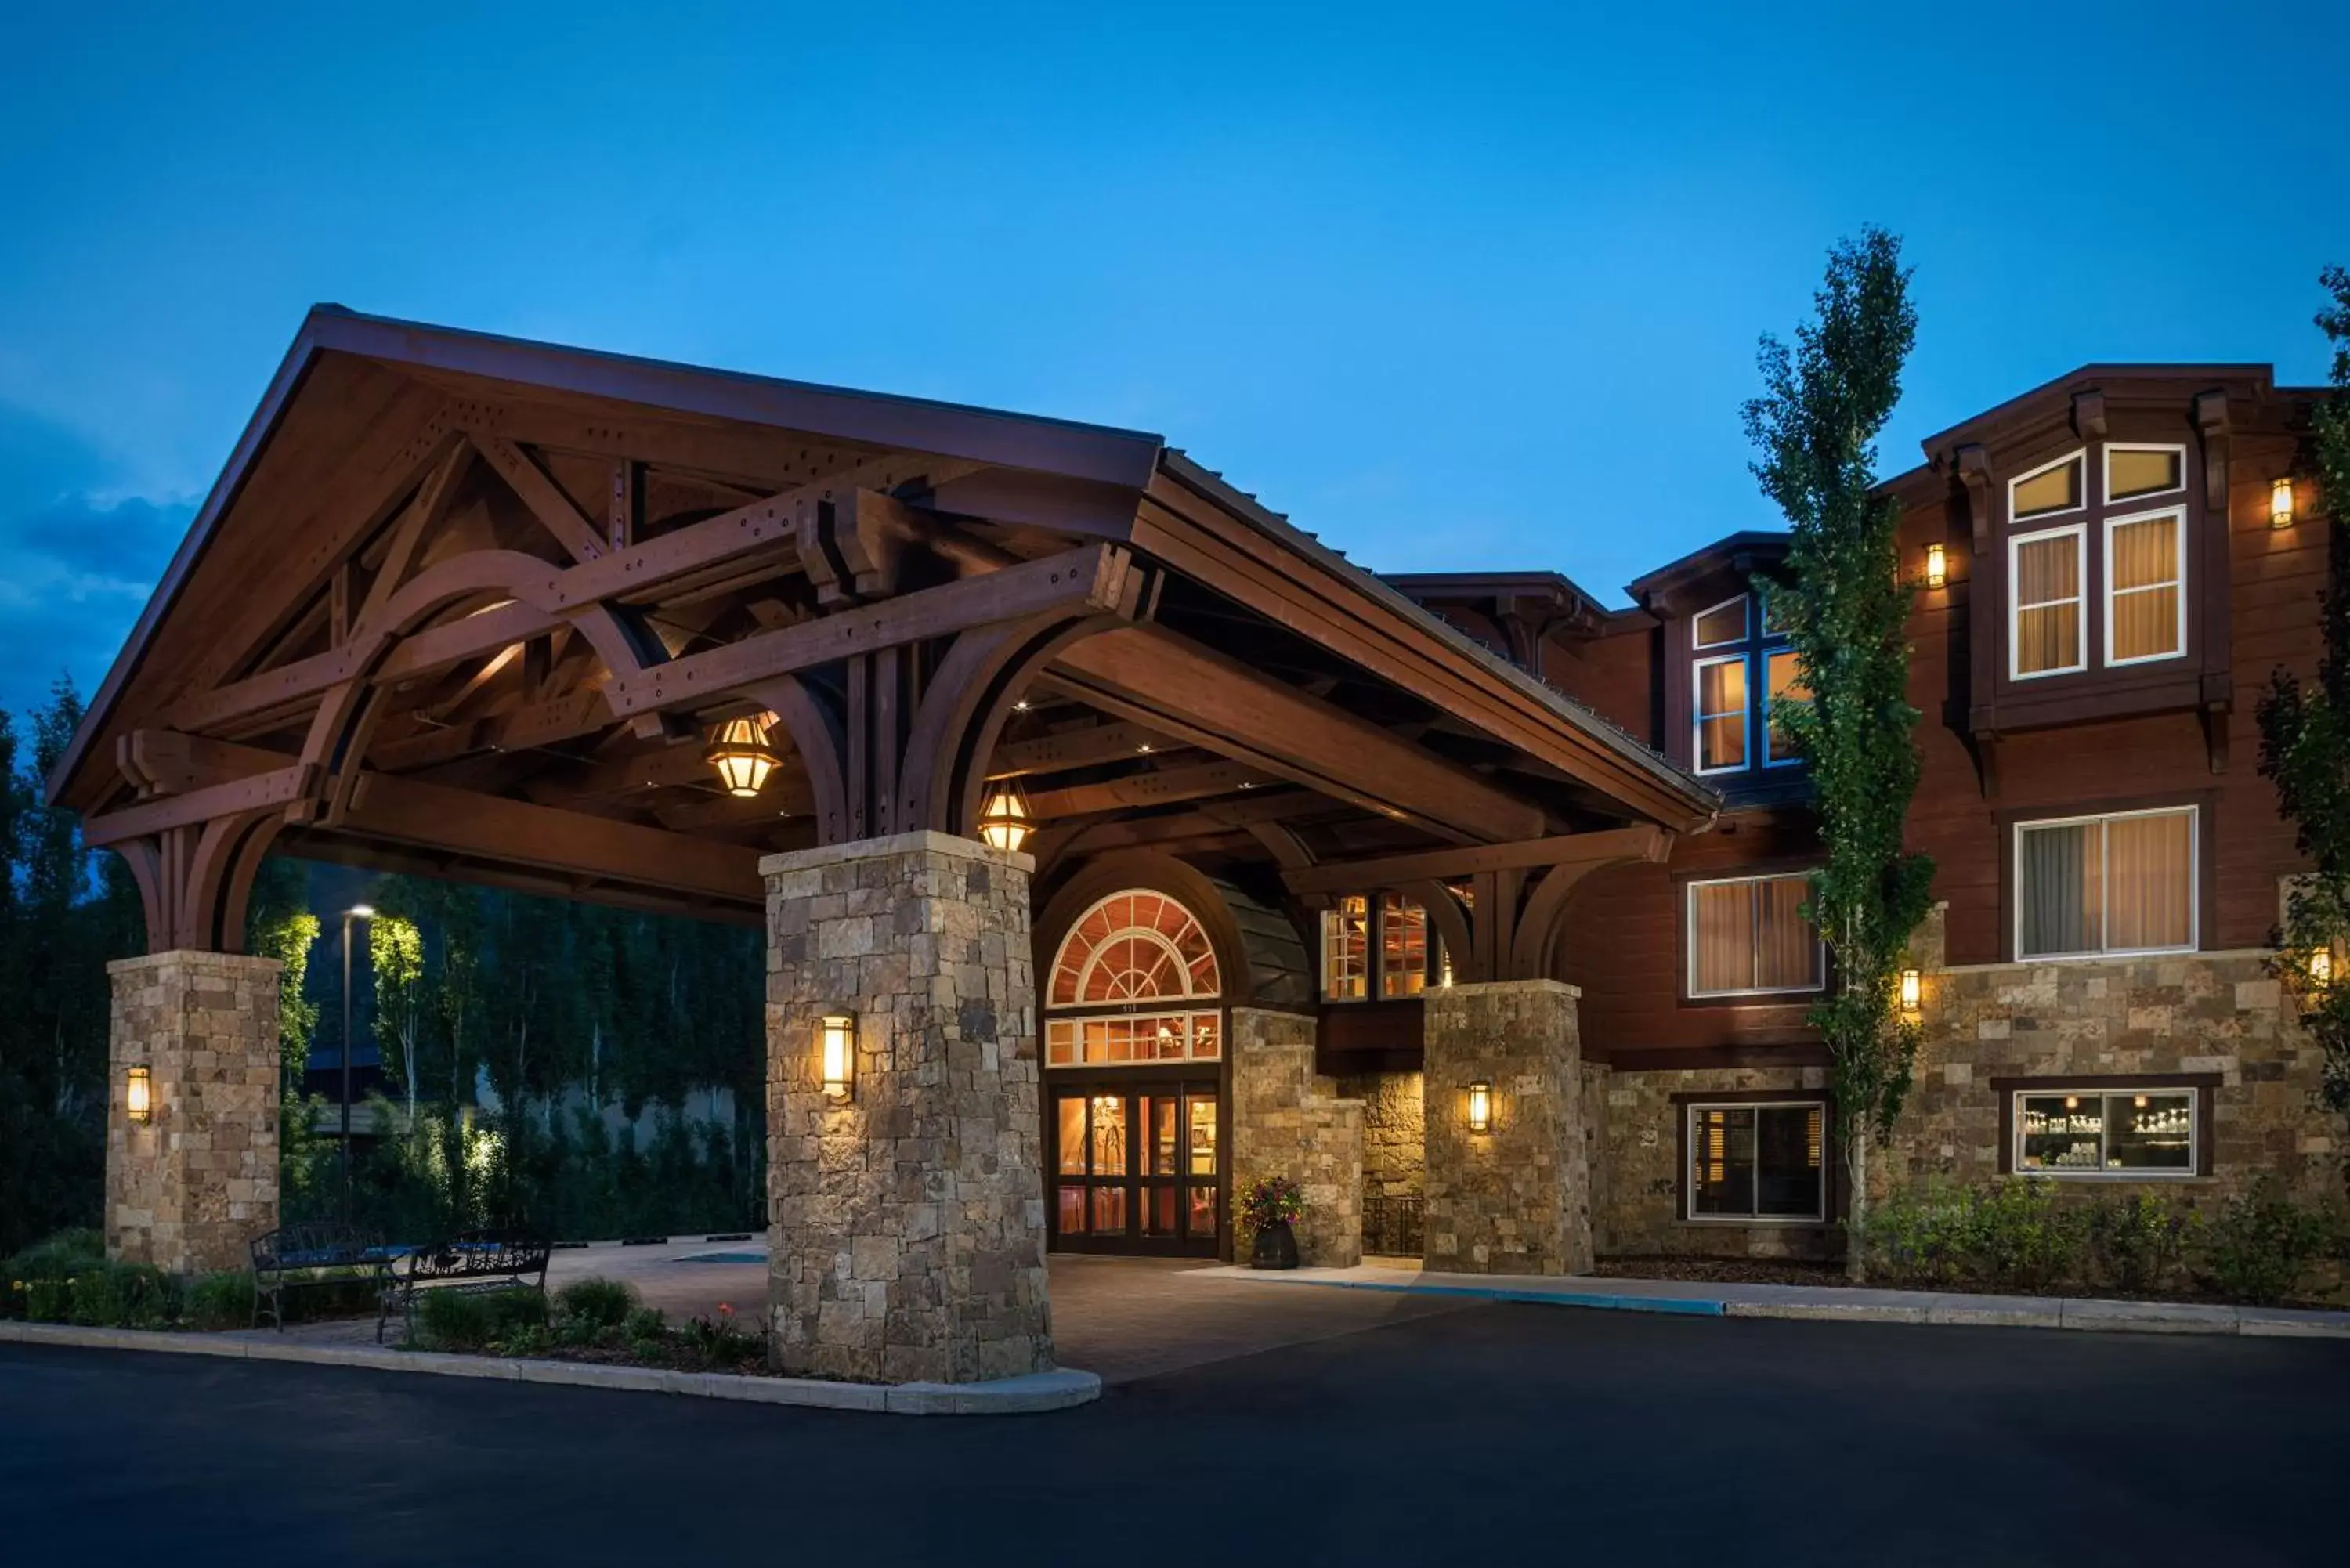 Property Building in Wyoming Inn of Jackson Hole